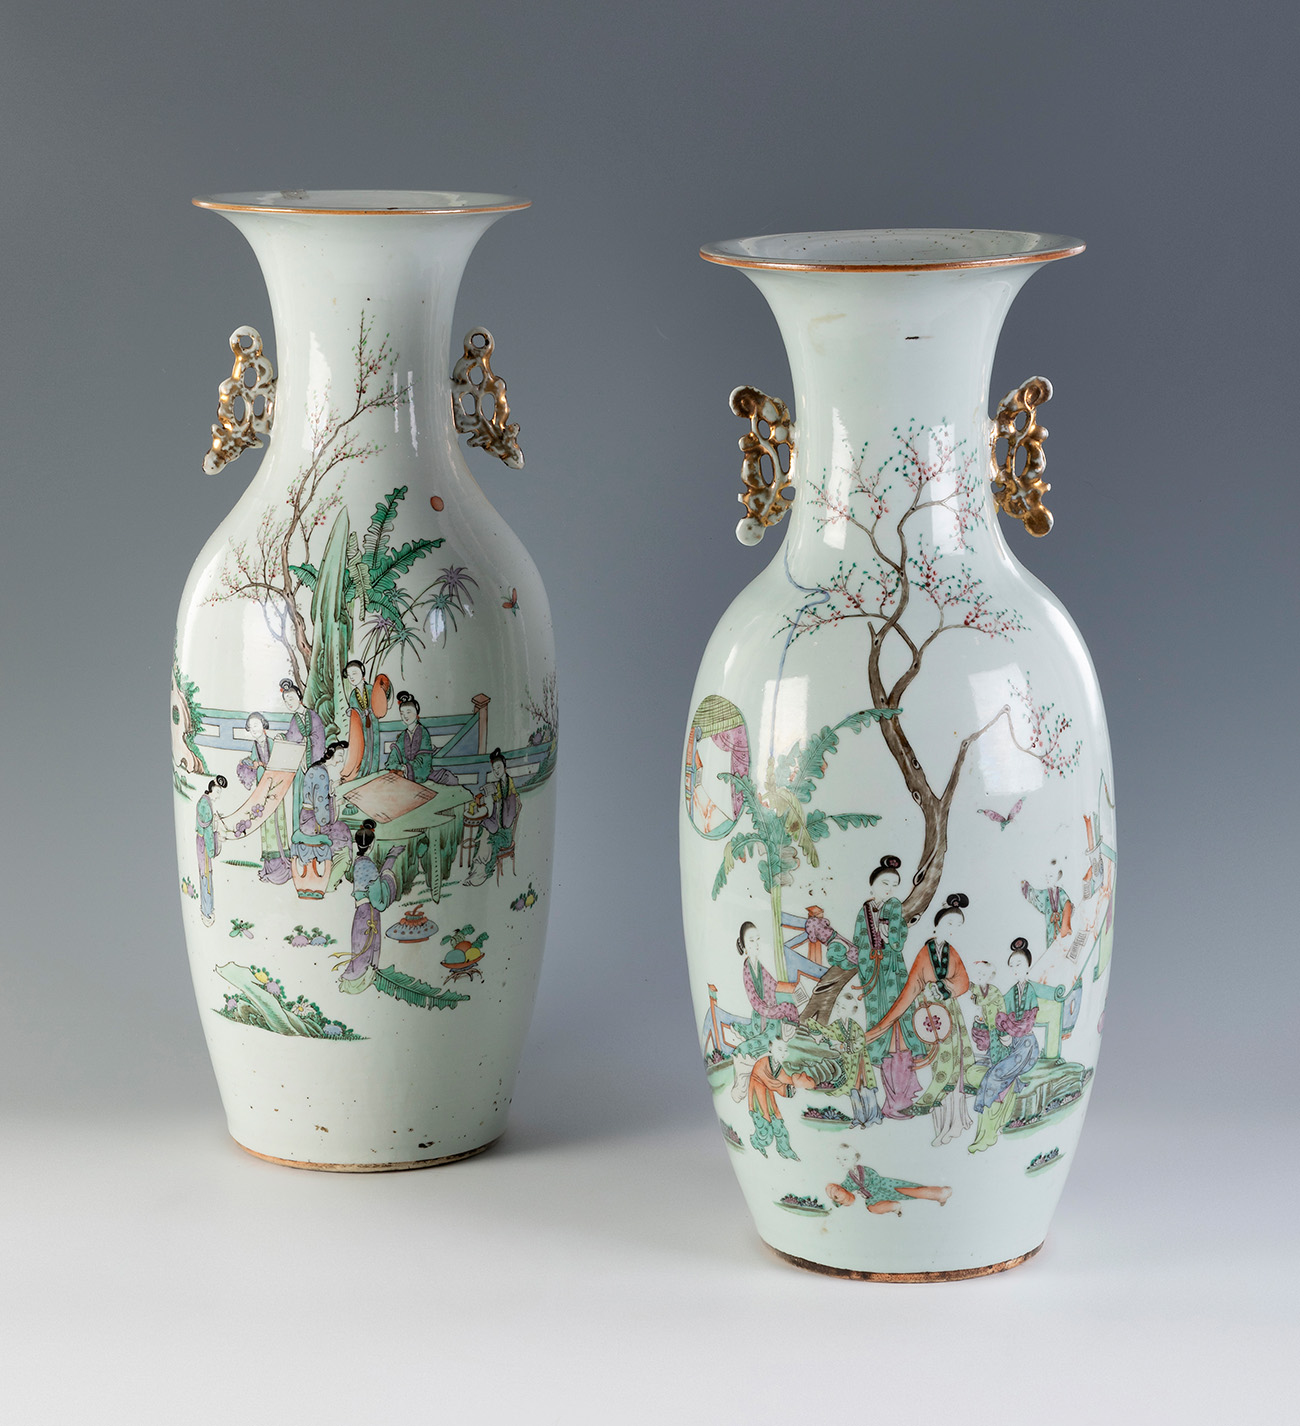 Pair of vases. China, Qing dynasty. Green family, 19th century.Hand-painted porcelain.Signed on